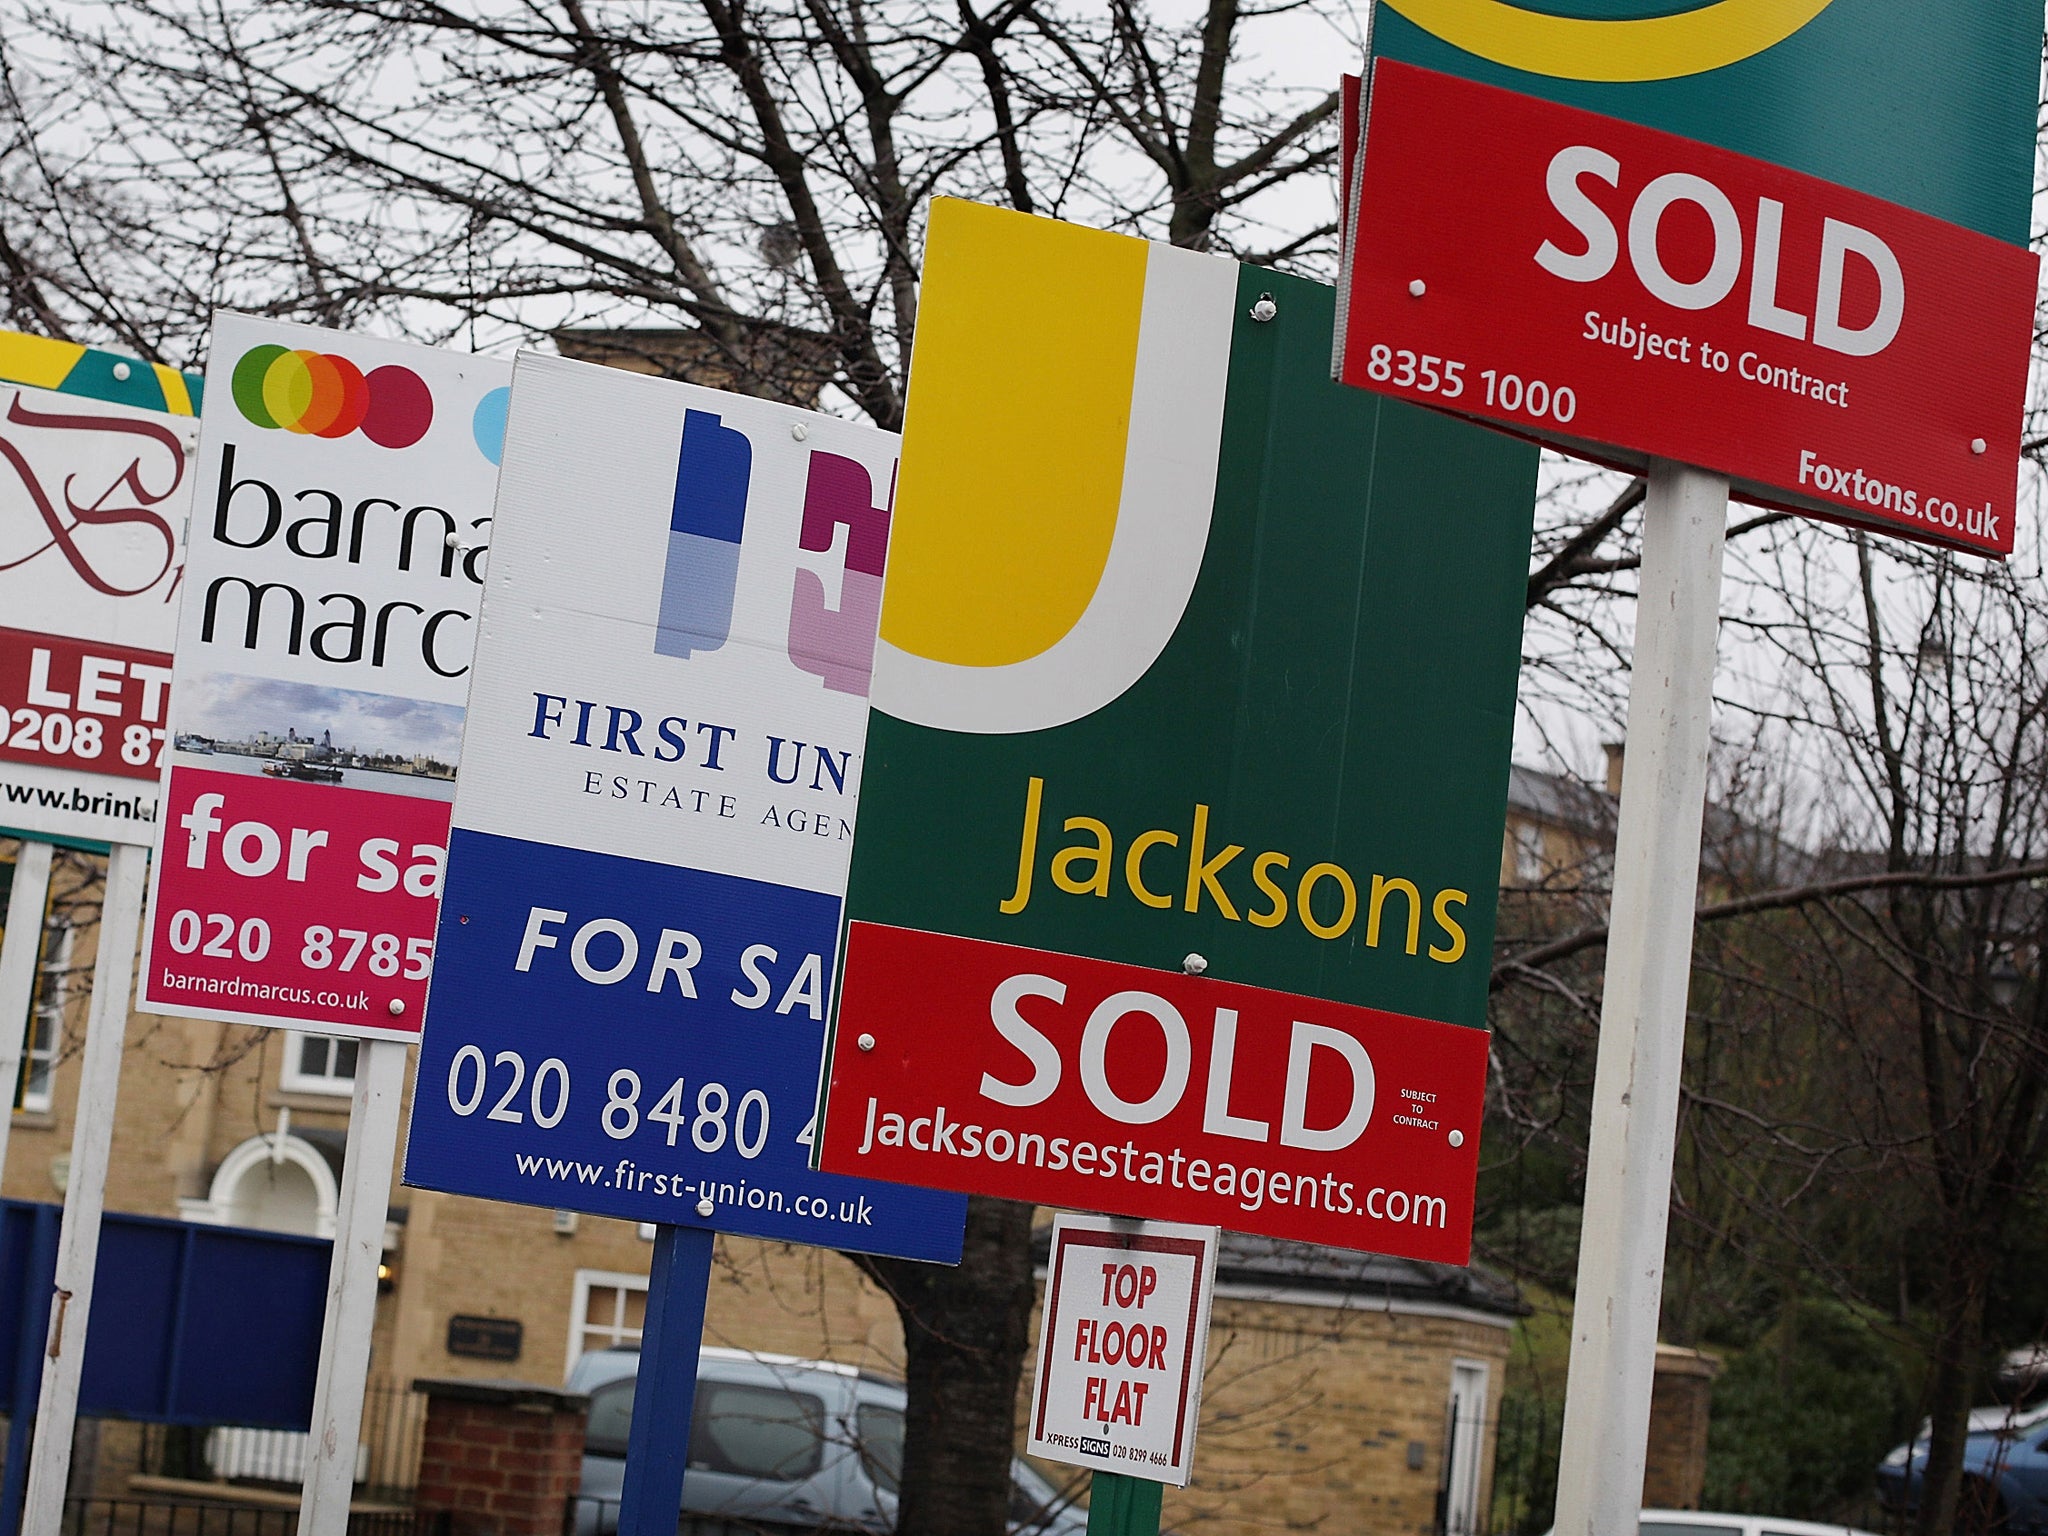 UK house prices rose 8.8 per cent in the 12 months to January, according to Nationwide data